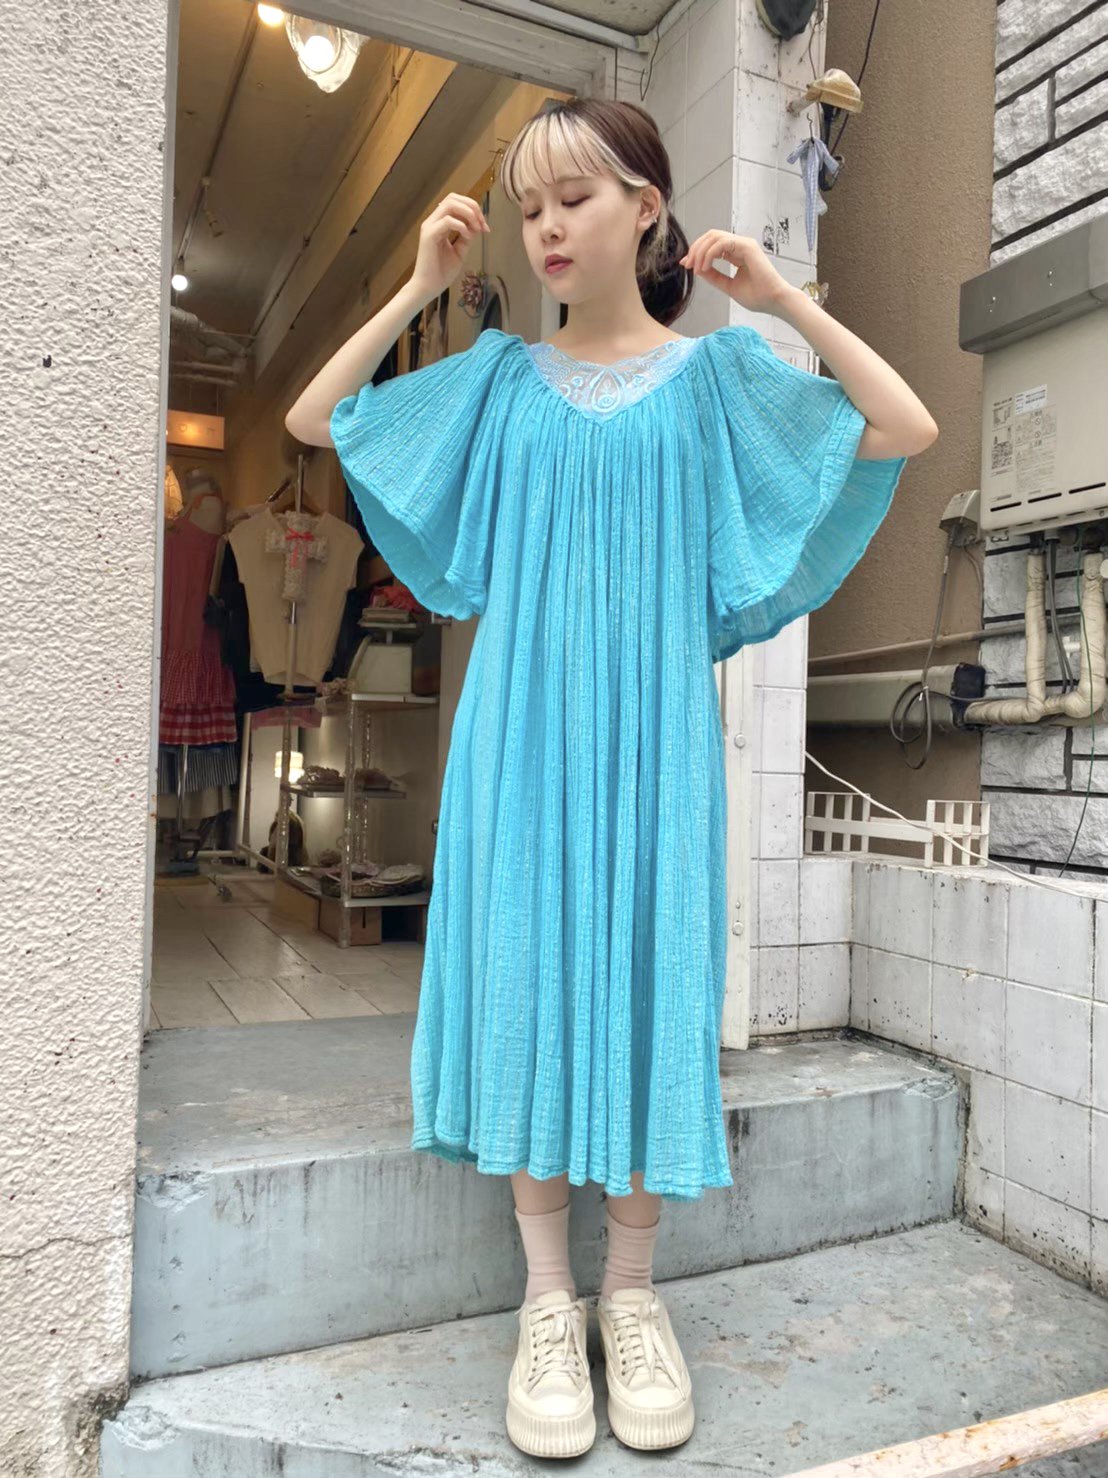 <img class='new_mark_img1' src='https://img.shop-pro.jp/img/new/icons20.gif' style='border:none;display:inline;margin:0px;padding:0px;width:auto;' />《SALE》Graecia one-piece lame blue